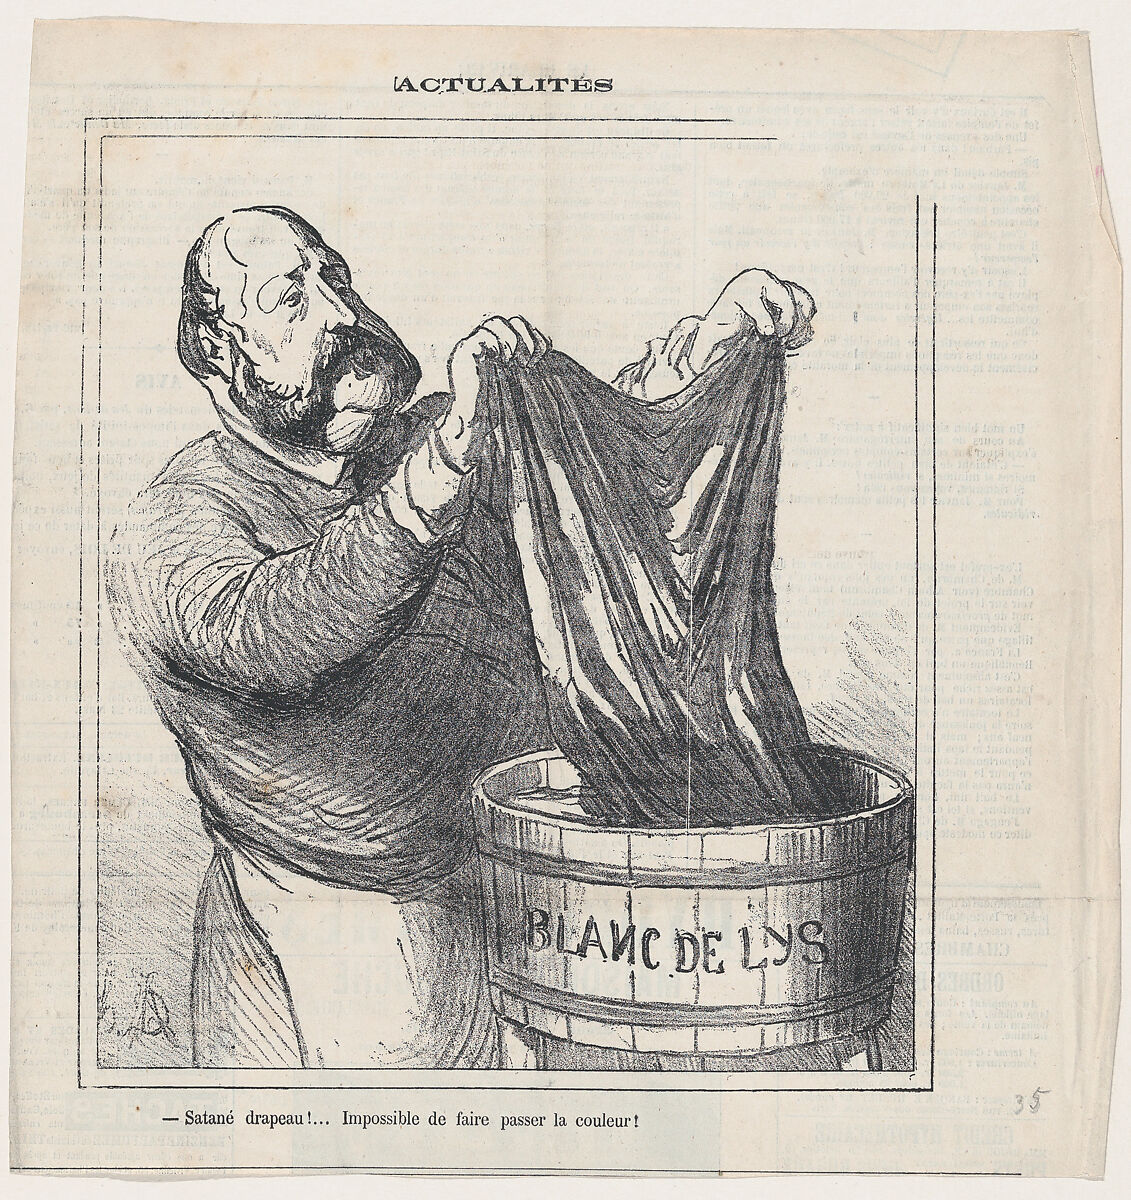 Damned flag! Impossible to get rid of the color, from 'News of the day,' published in "Le Charivari", Honoré Daumier (French, Marseilles 1808–1879 Valmondois), Lithograph on newsprint; second state of two (Delteil) 